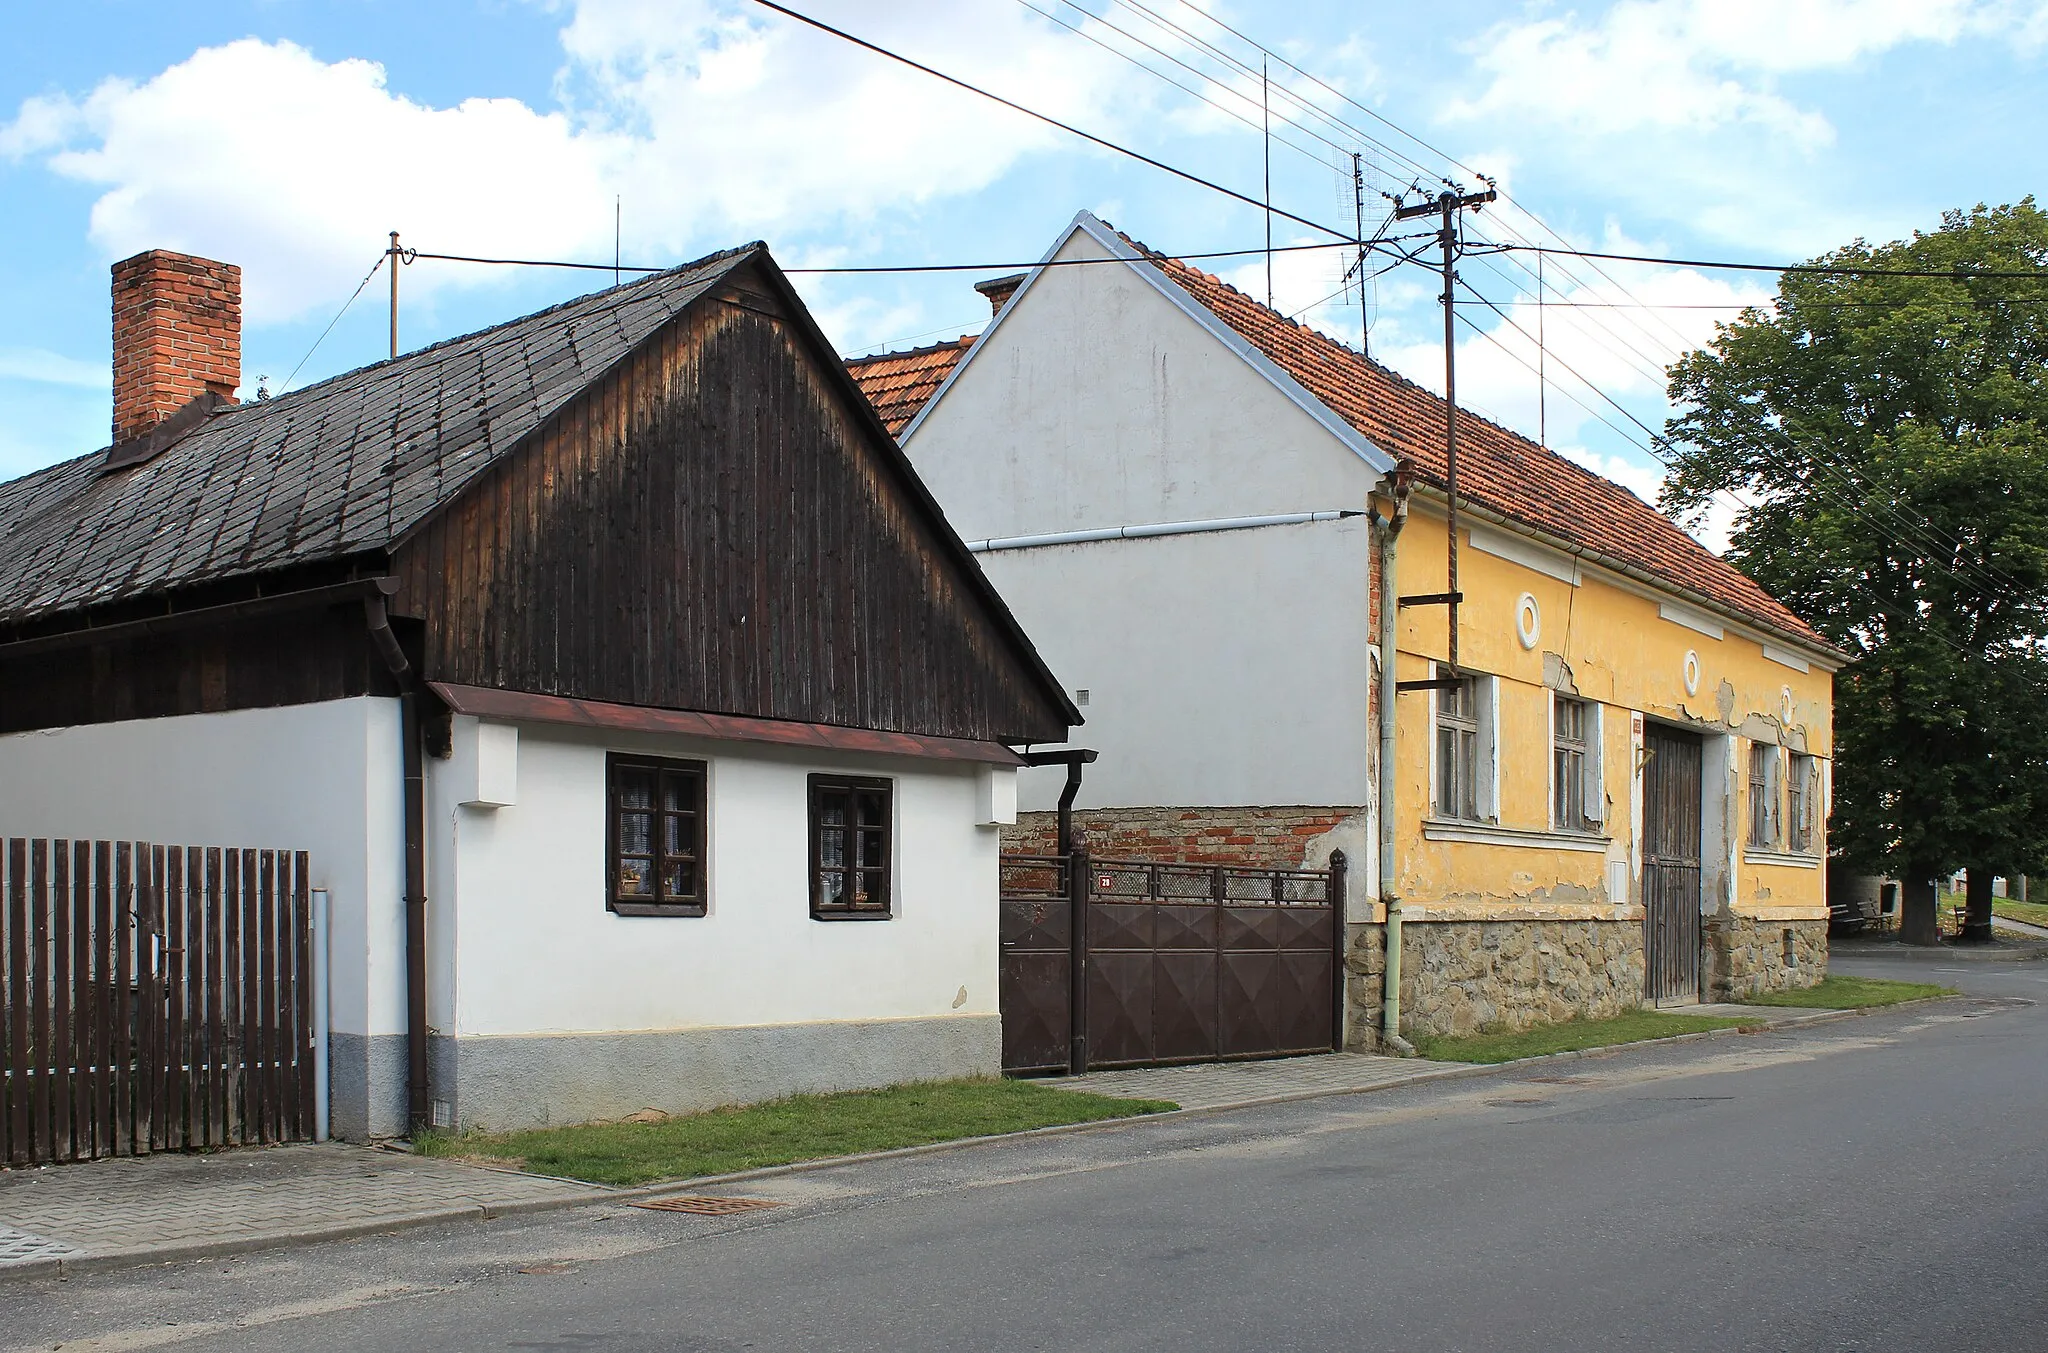 Photo showing: Houses No. 27 and 28 in Čermná, Czech Republic.